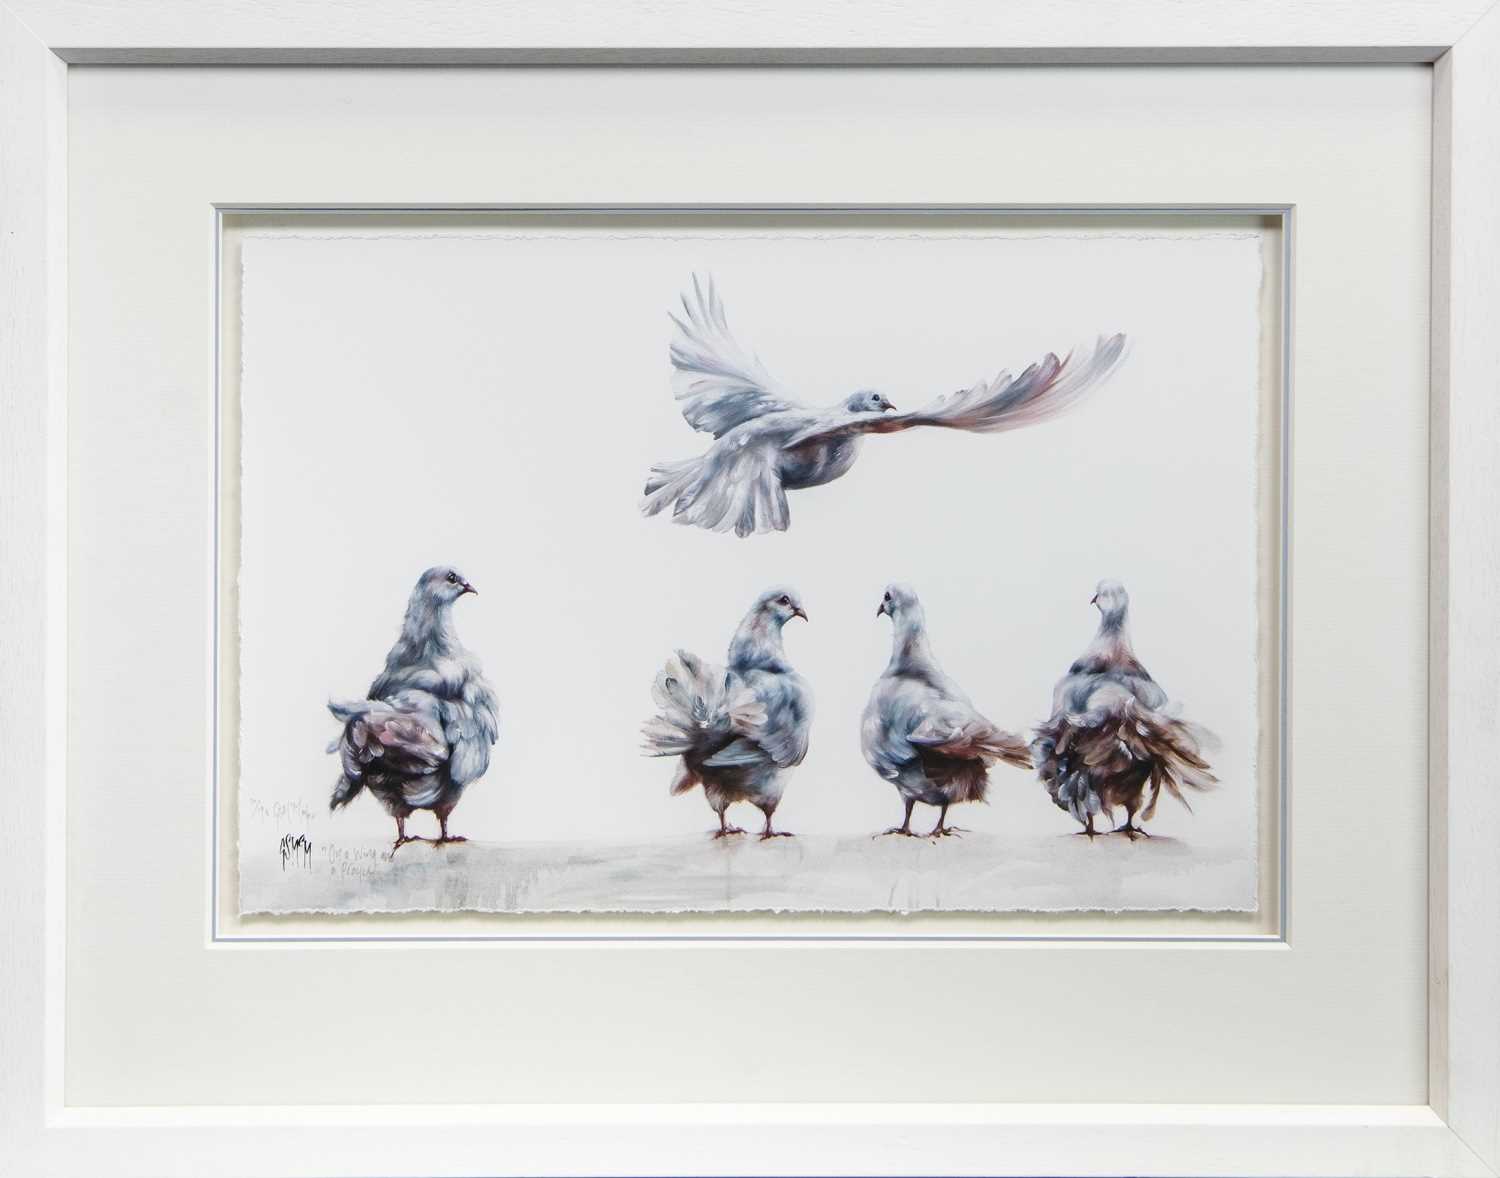 Lot 585 - ON A WING AND A PRAYER, A GICLEE PRINT BY GEORGINA MCMASTER